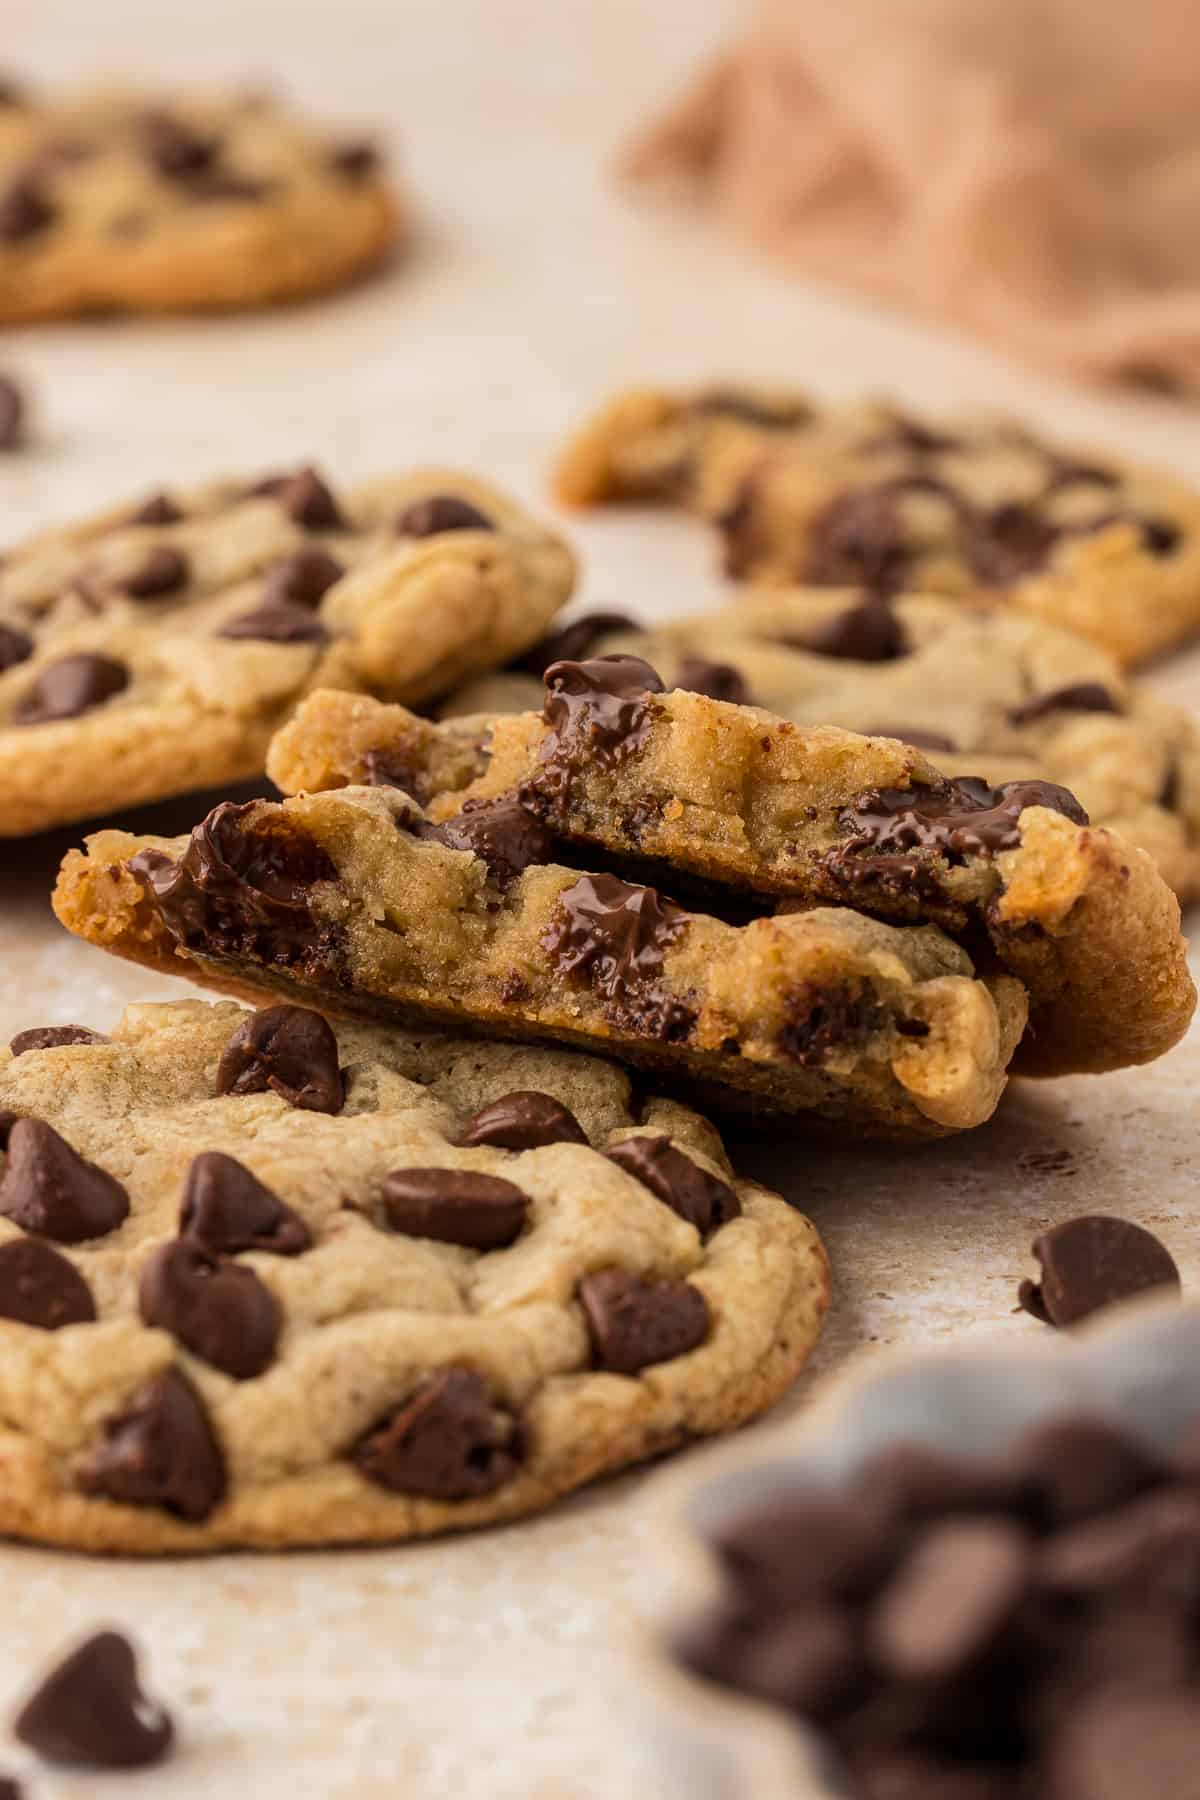 brown butter chocolate chip cookies scattered around, with one cookie broken in half and stacked leaning on another cookie exposing the inside with melted chocolate chips and more chocolate chips sprinkled around